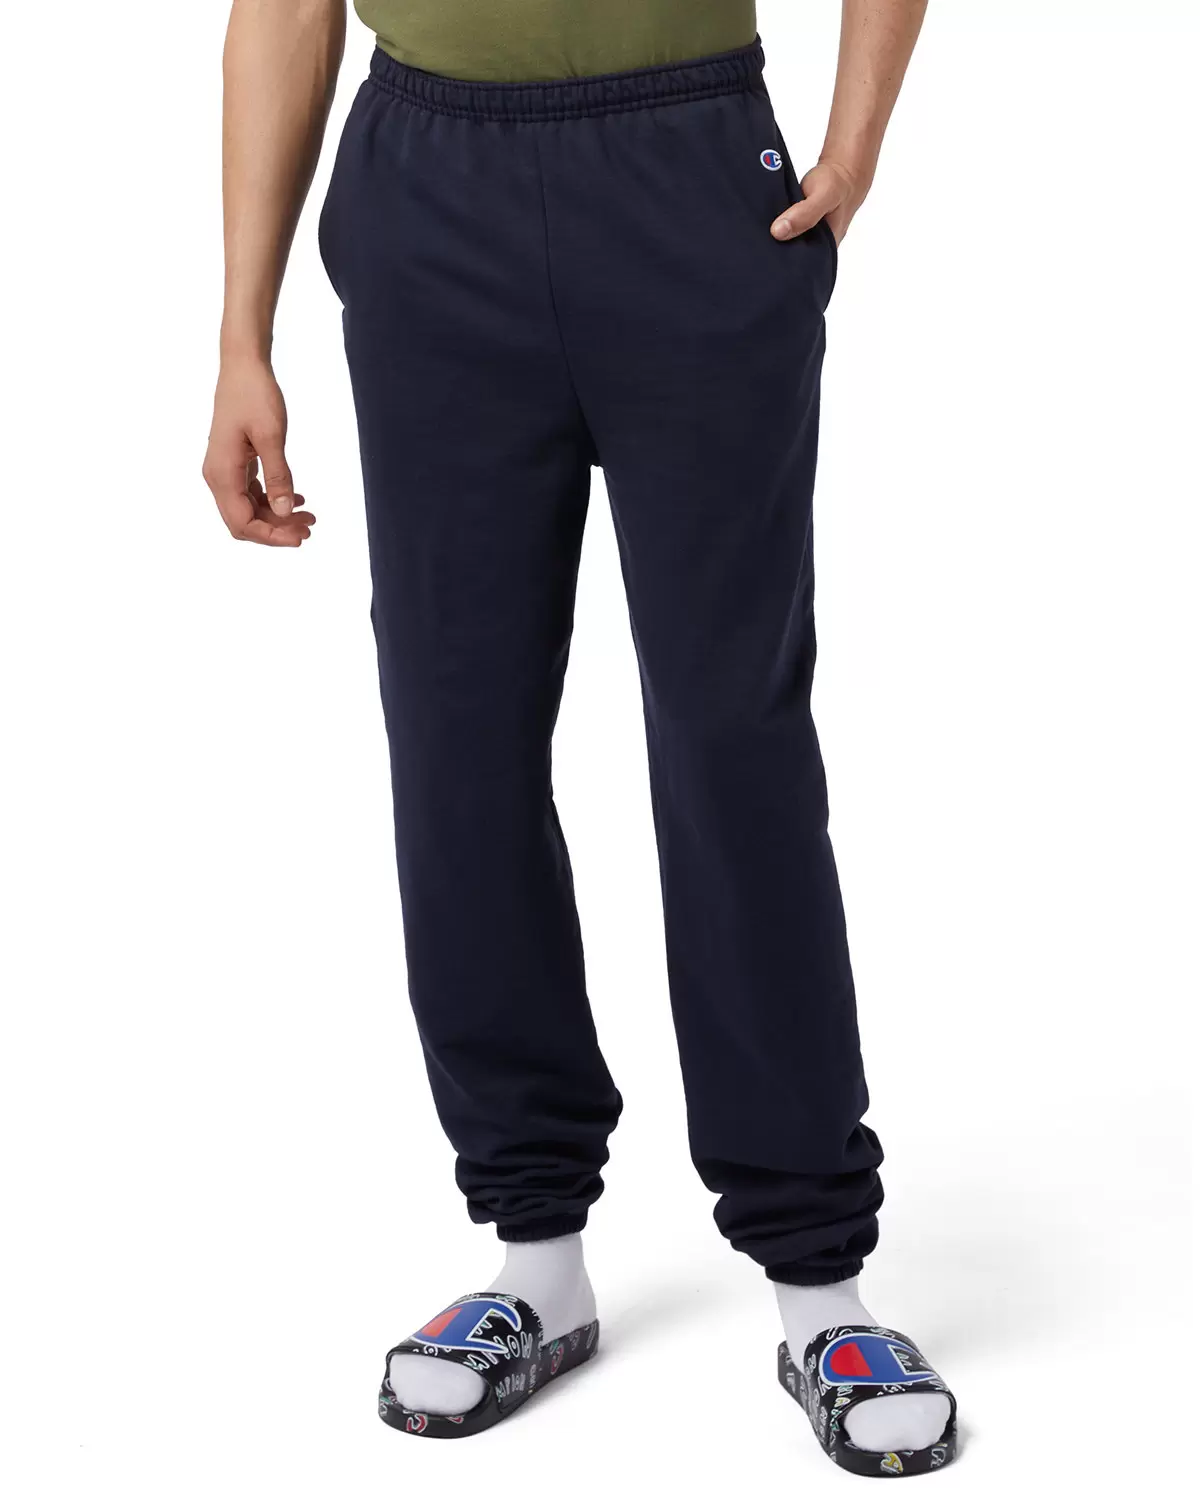 Champion Clothing P950 Powerblend® Sweatpants with Pockets - From $15.48